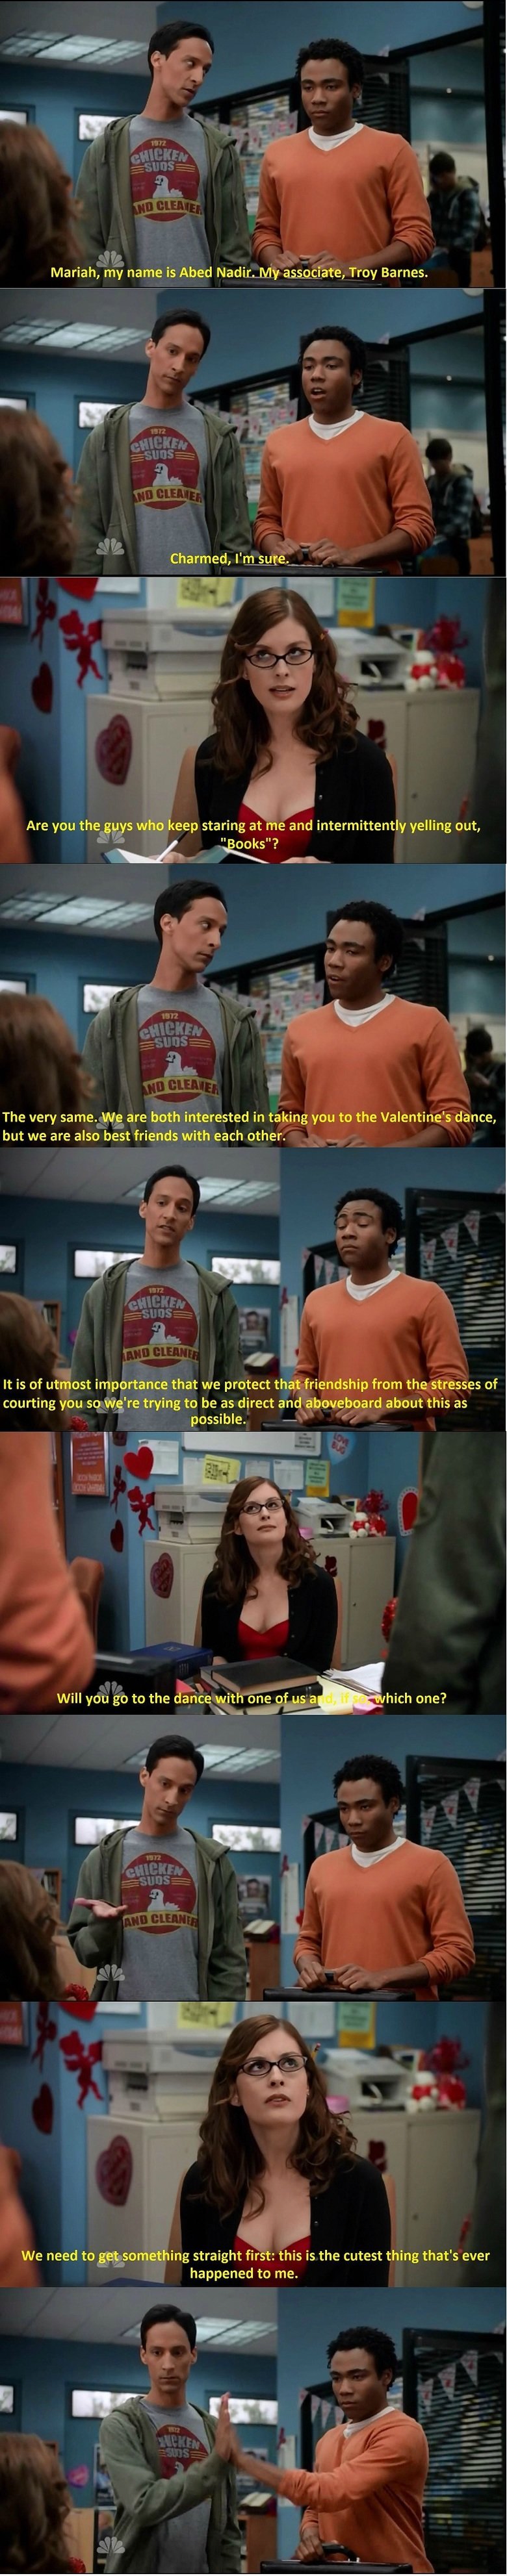 my favorite comedy scene. . Mariam my name IS Abed , Troy Barnes. The very are both interested in taking you to the Valentine' s dance, but we are also best fri